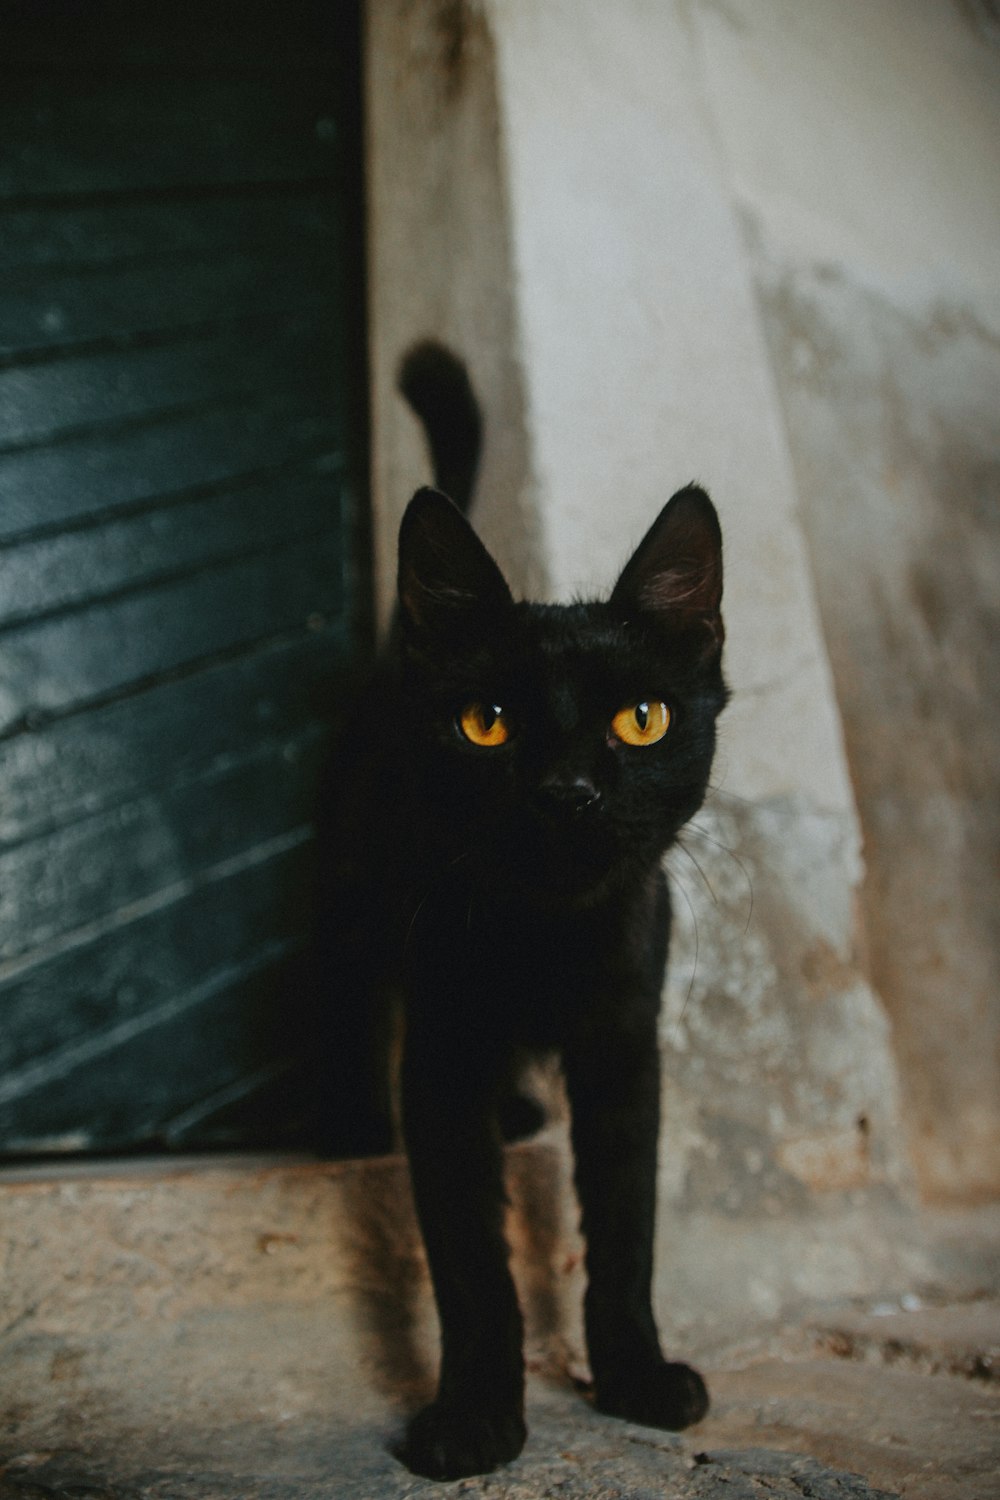 a black cat with yellow eyes standing in front of a door